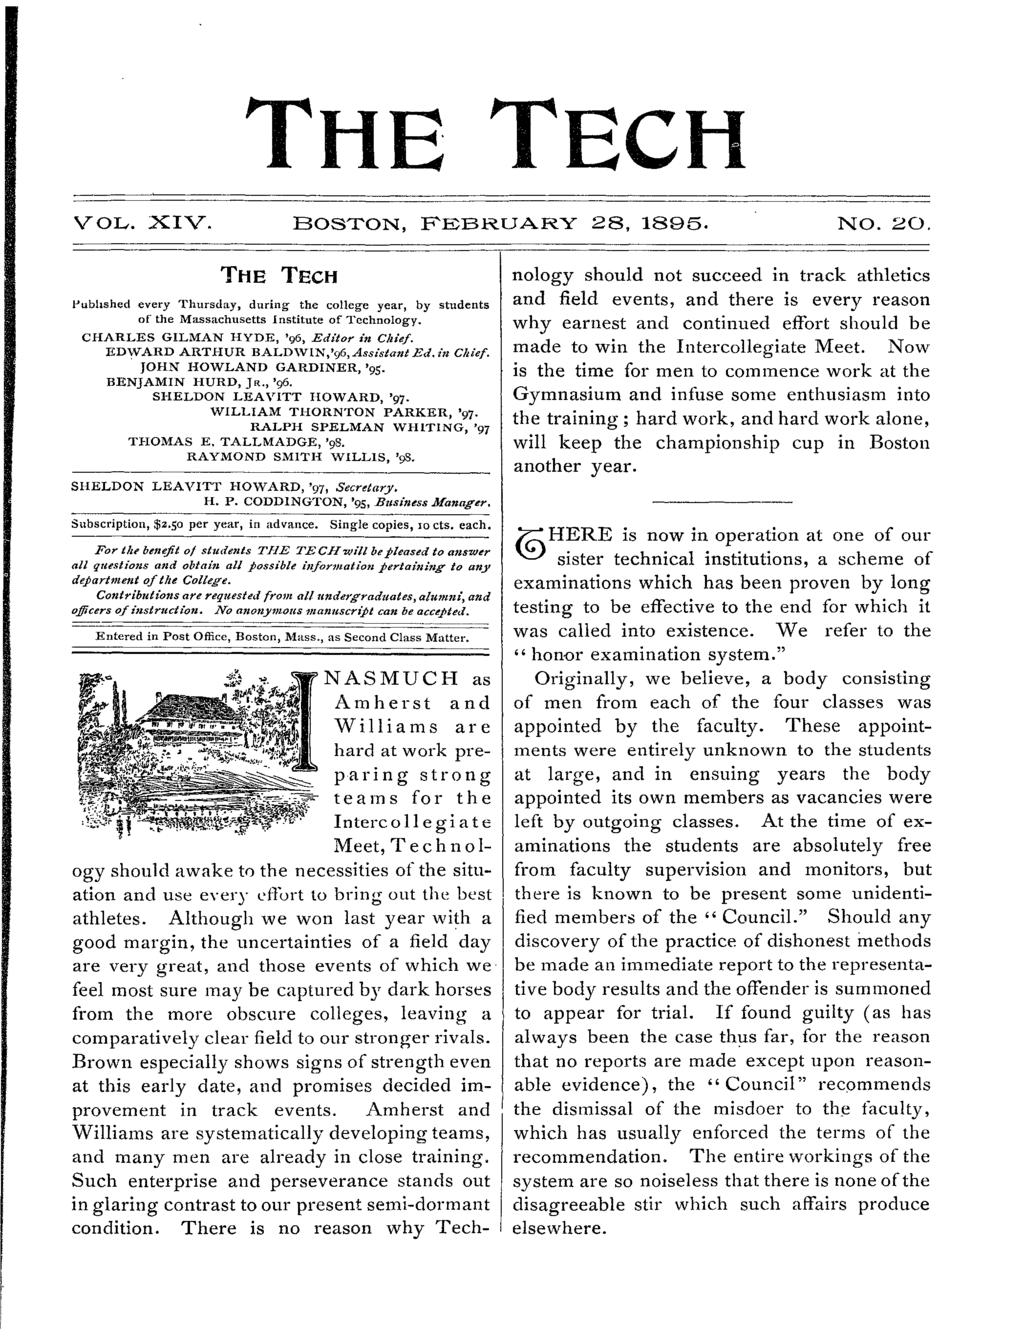 THE TECH VOL. XV. BOSTON, FEB3RUARY 28, 1895. NO. 20. TH E TECH Publshed every Thursday, durng the college year, by students of the Massachusetts nsttute of Technology.